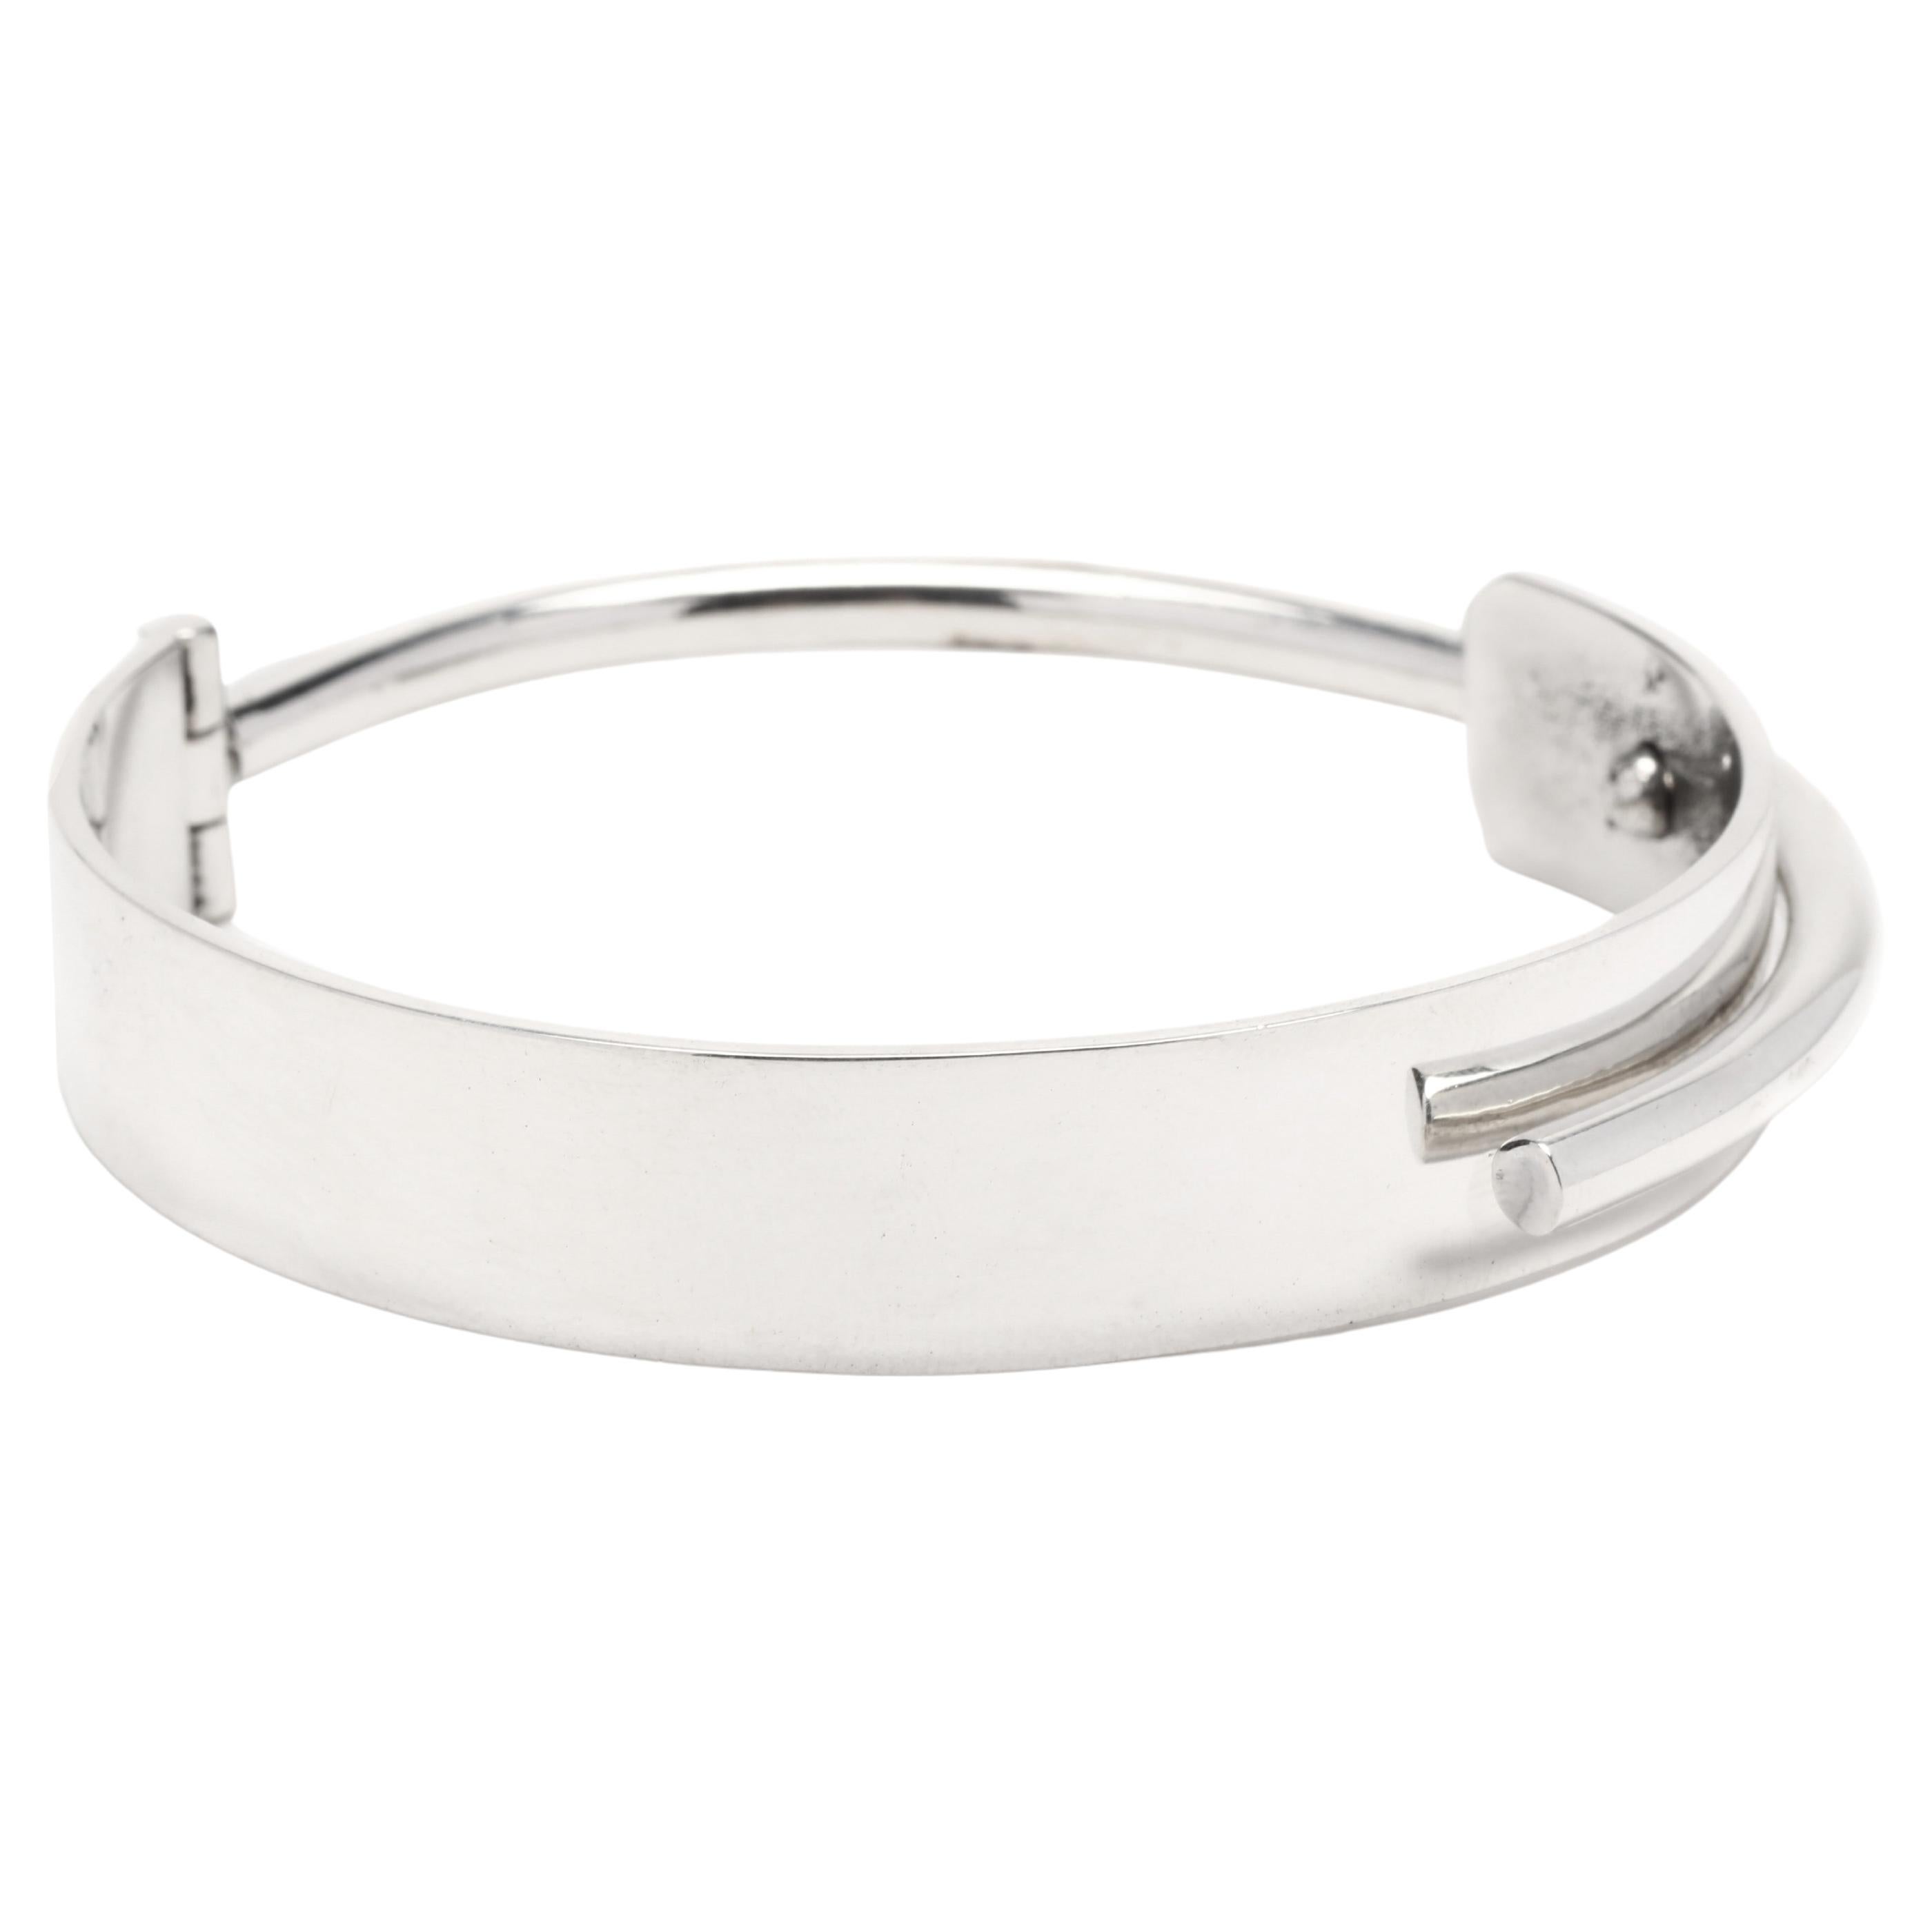 Mexican Escorcia Modern Hinged Bangle Bracelet, Sterling Silver